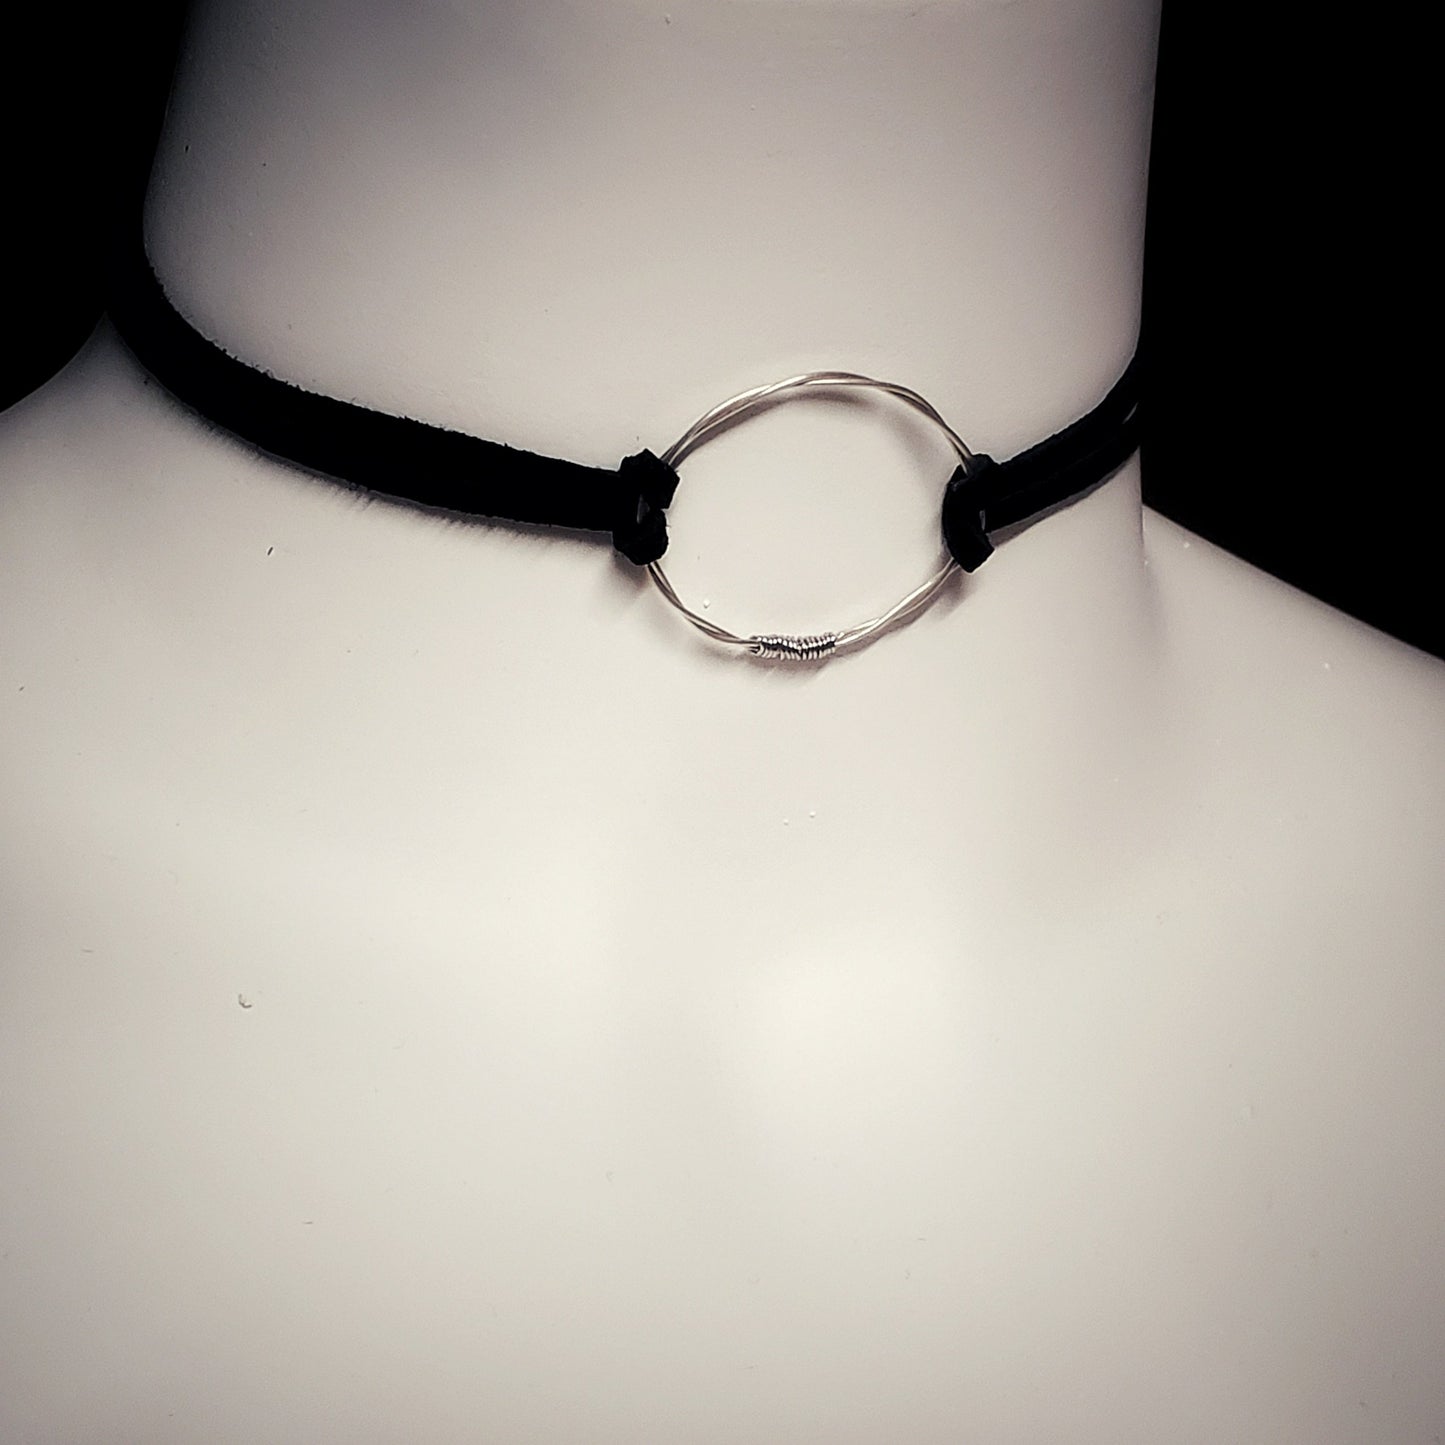 white bust - on the neck there is a choker style necklace - in the middle is a circle made from a piece of upcycled violin string on either side there are black suede cords 